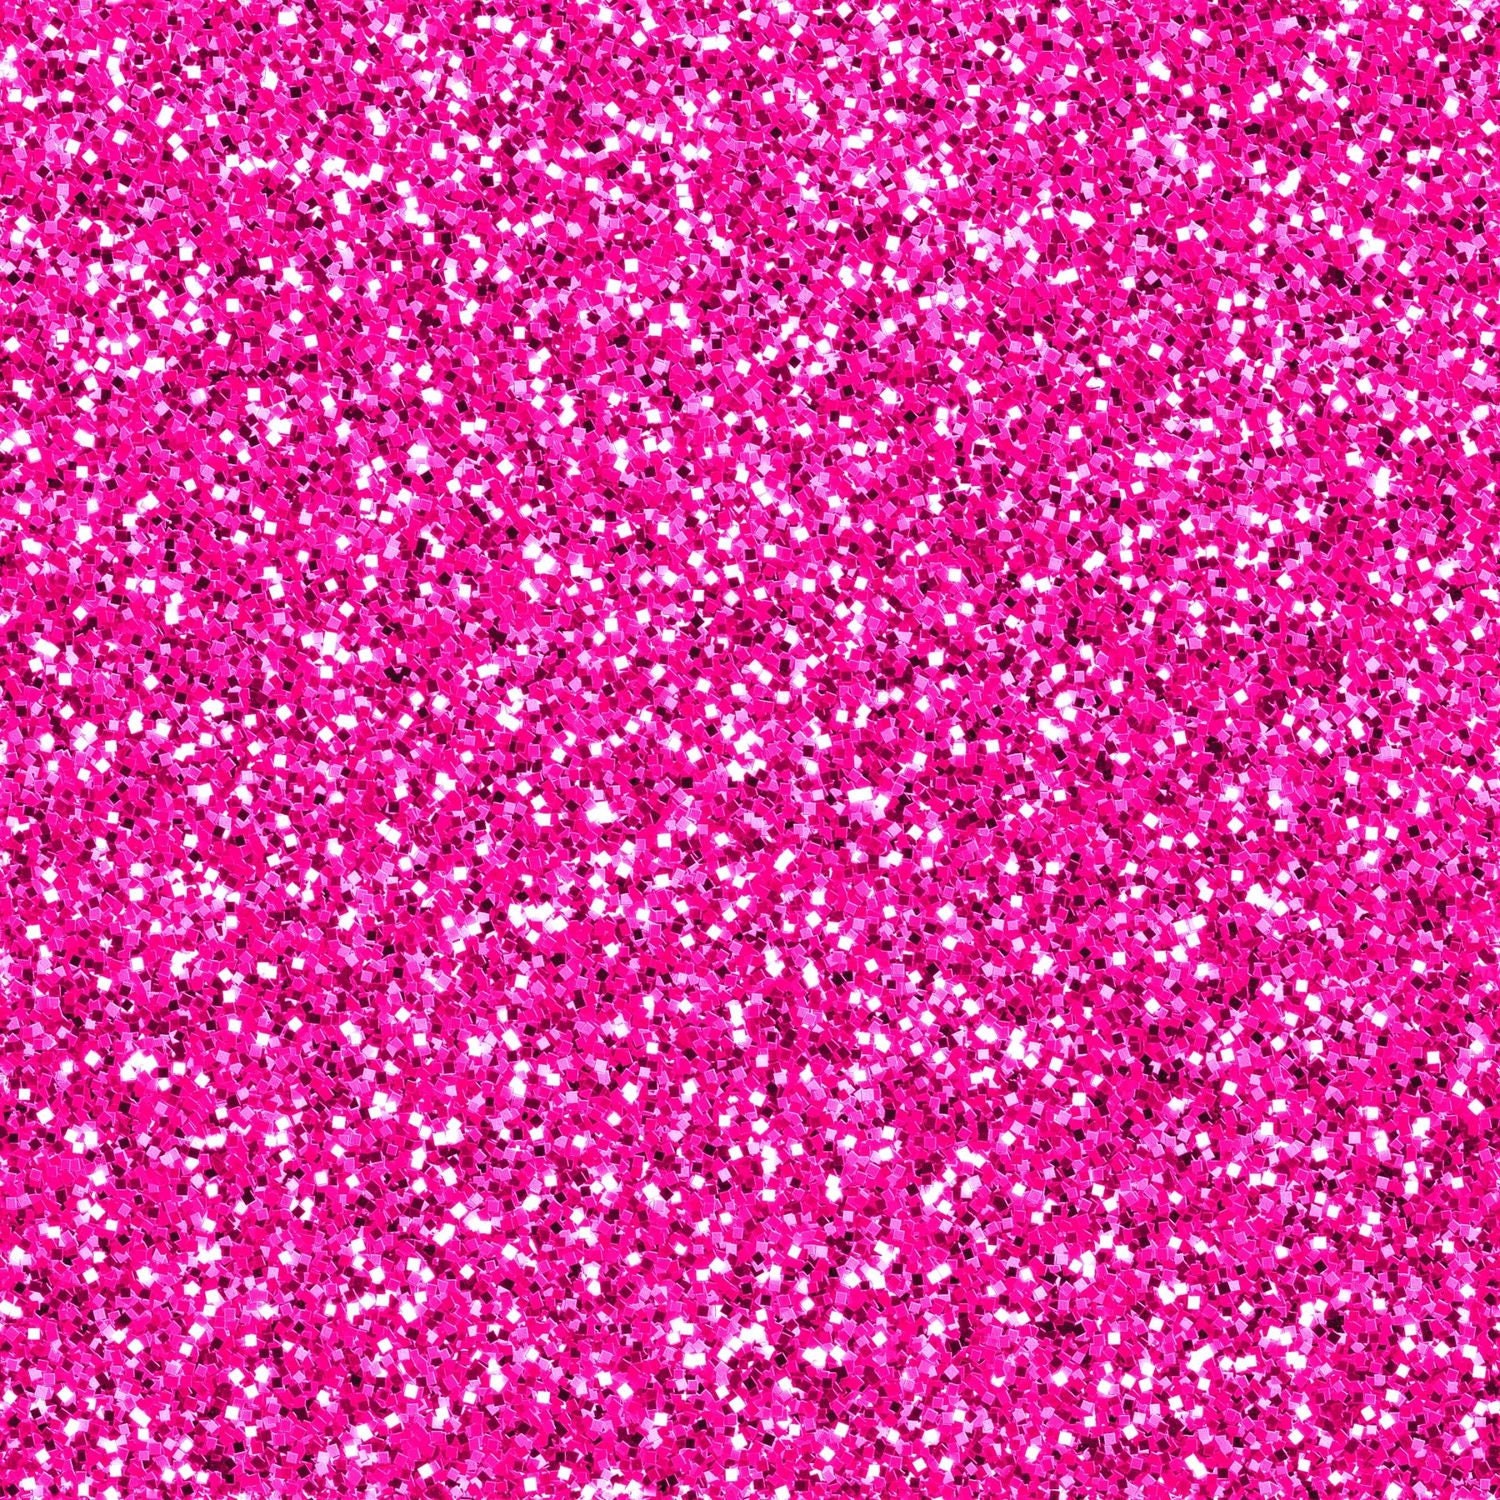 Hot Pink Glitter Digital Paper Background Pink Dipped Glitter Series - Etsy